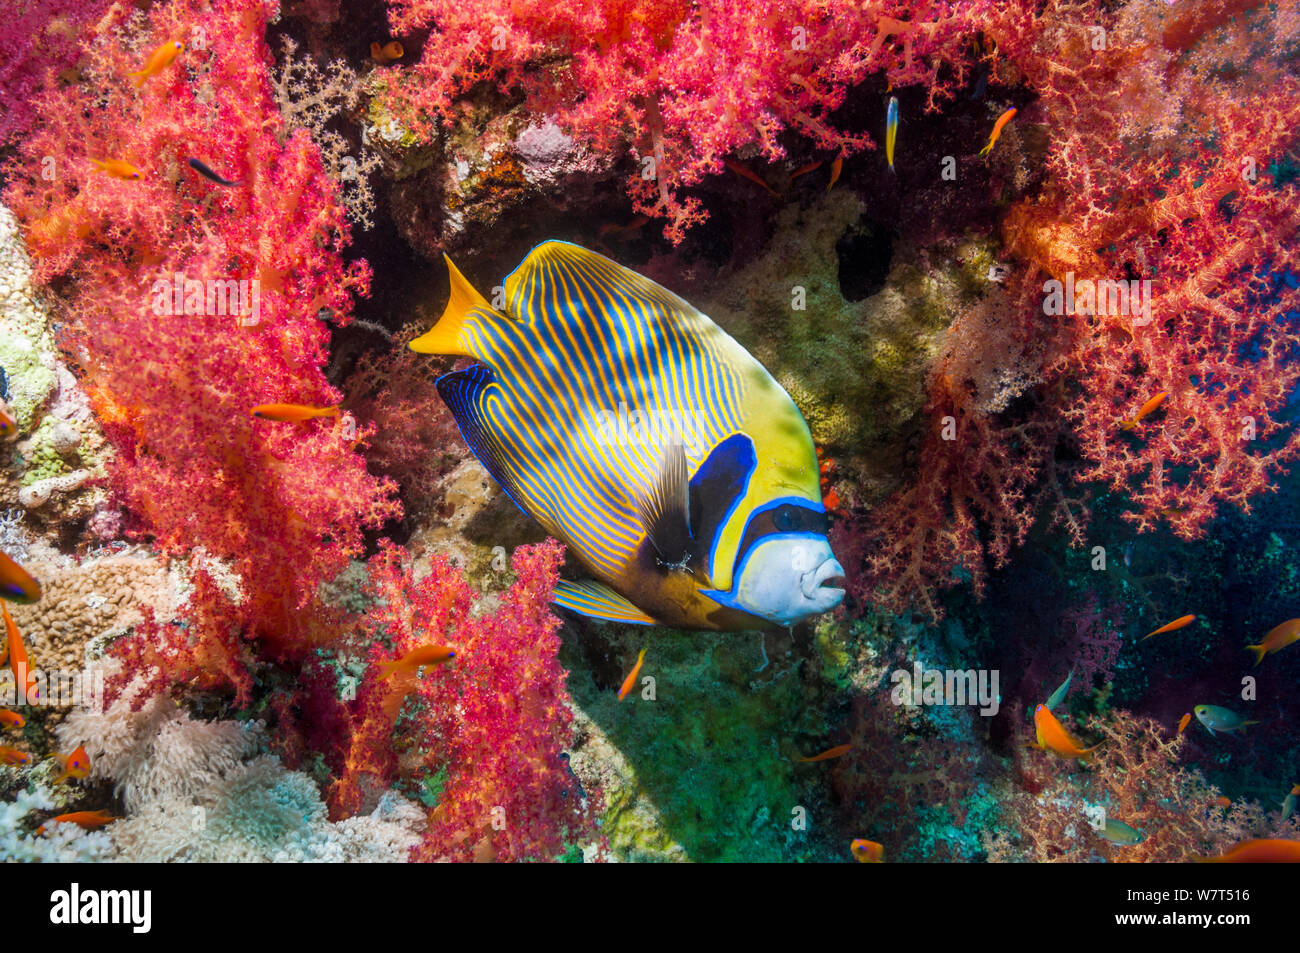 Emperor angelfish (Pomacanthus imperator) at a cleaning station amongst soft corals, where small cleaner shrimps operate. Egypt, Red Sea. Stock Photo